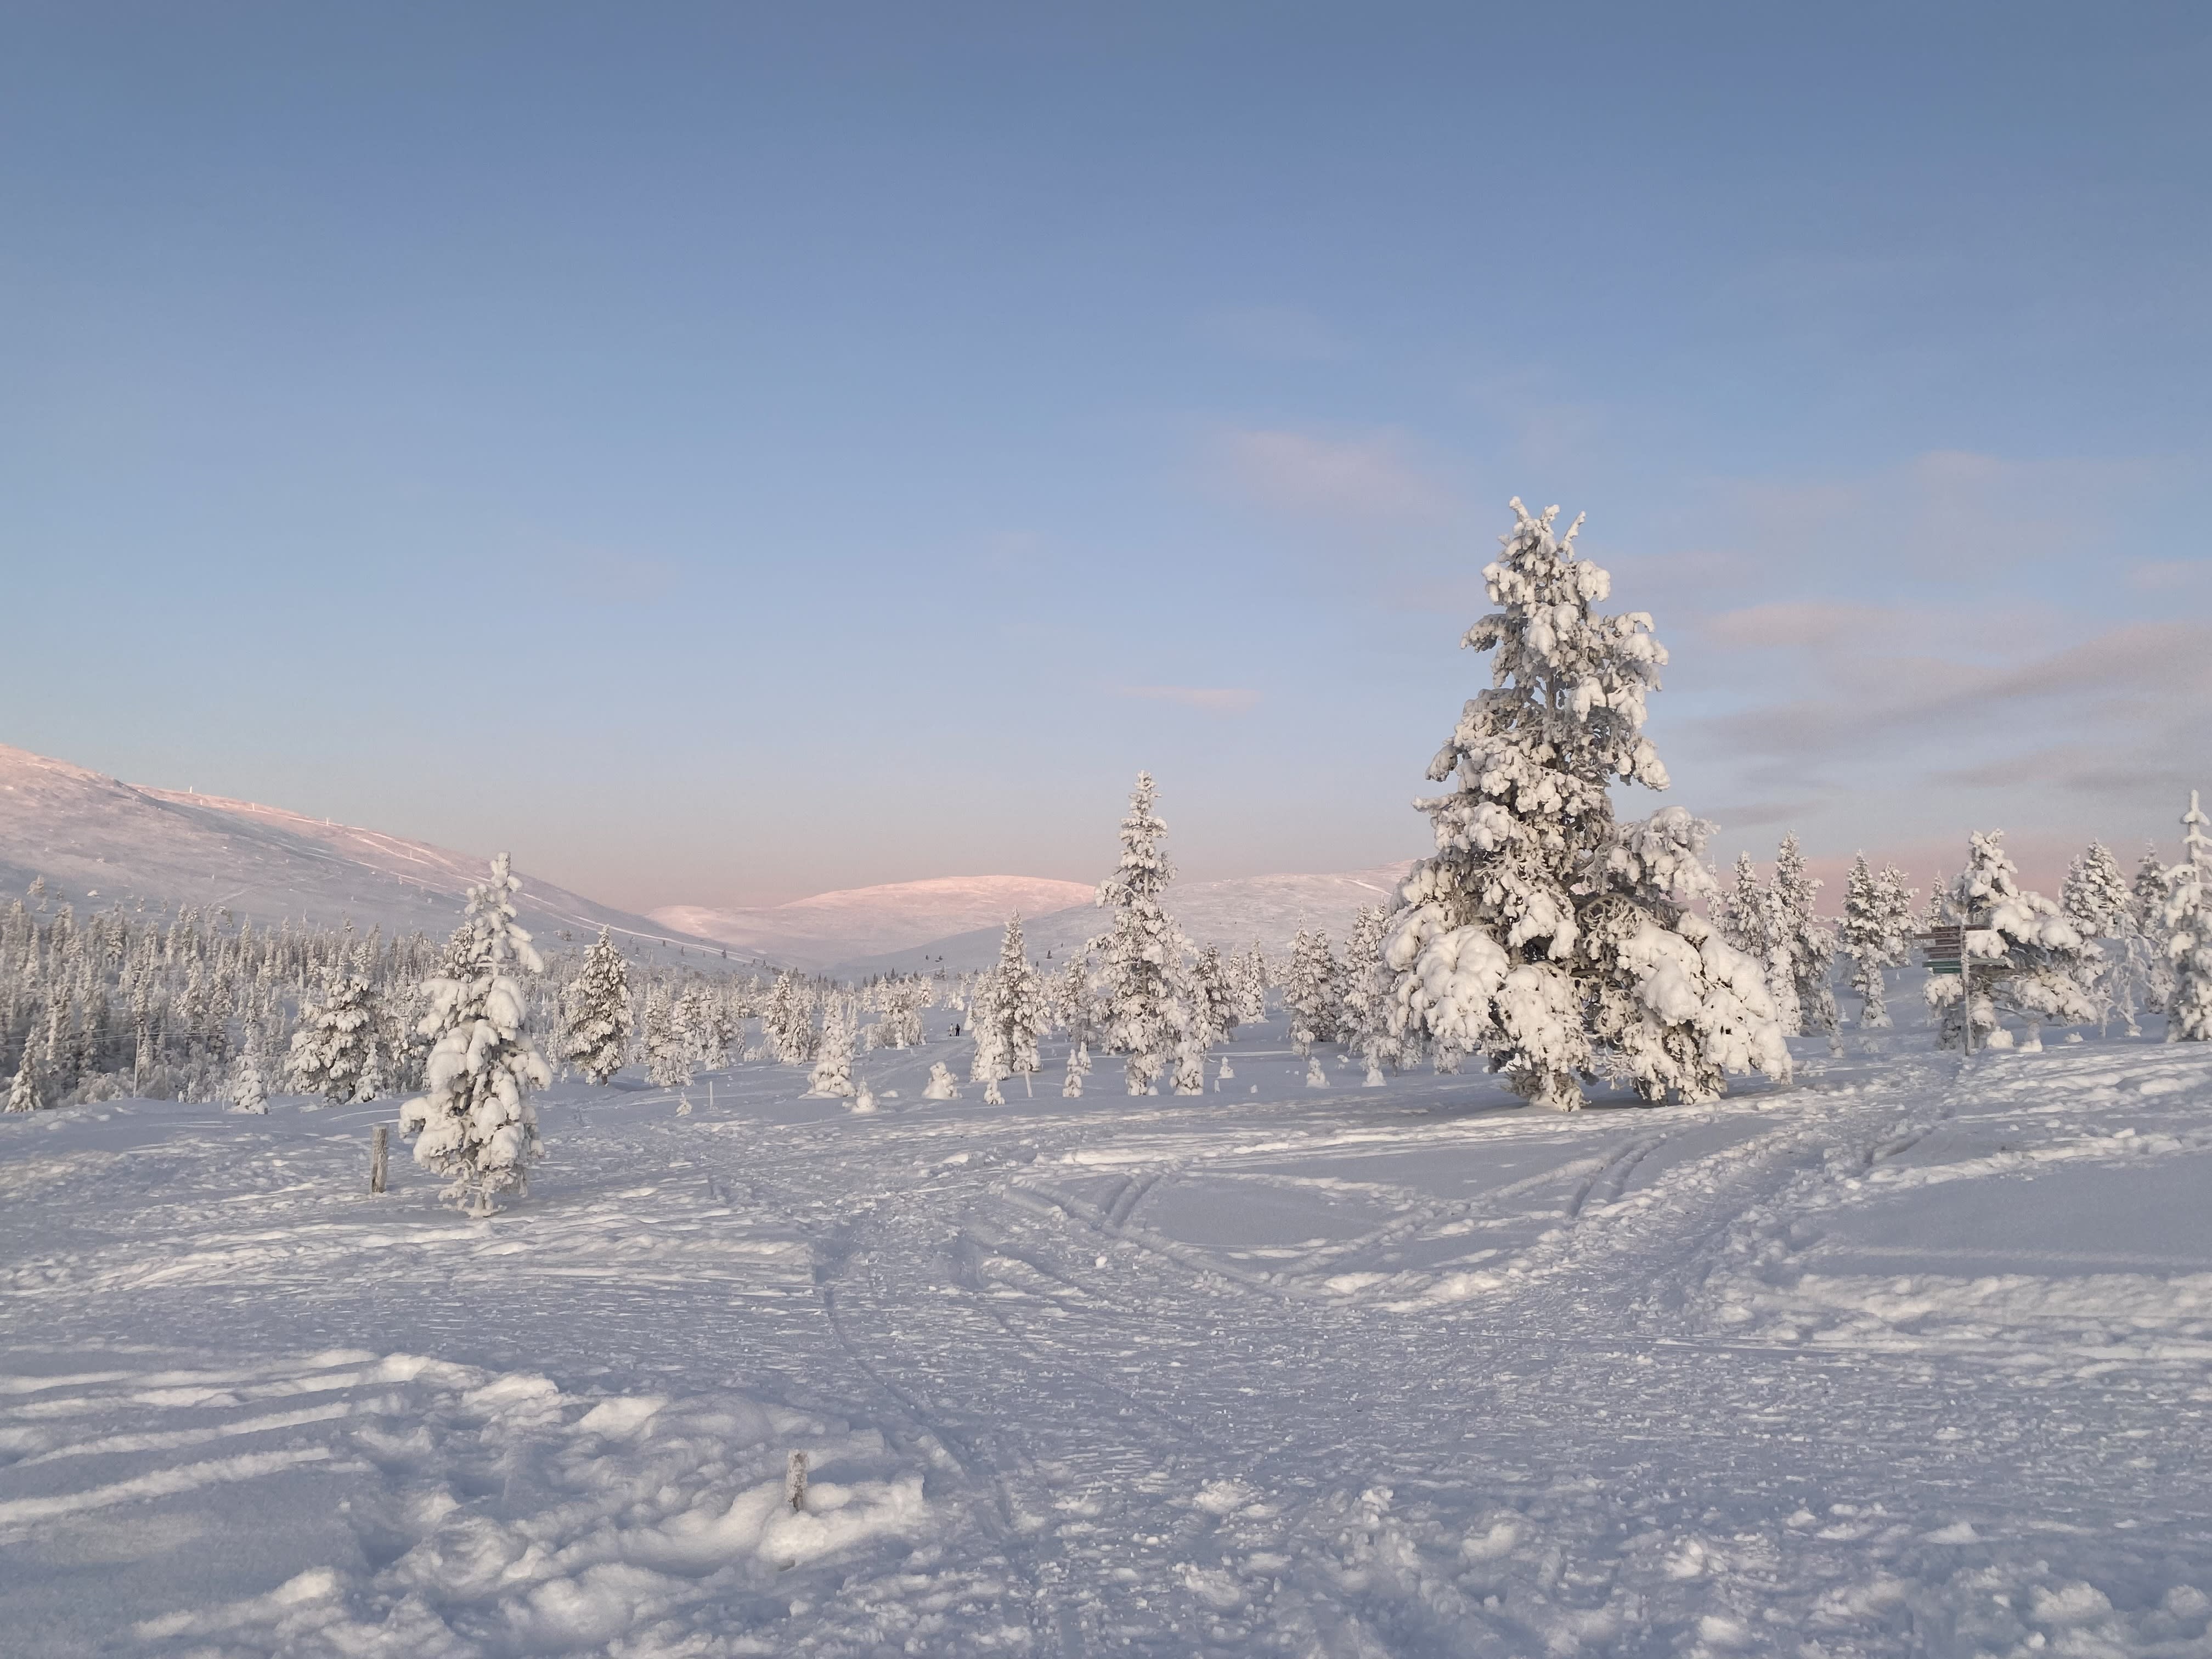 Finland's winter has been exceptionally snowy, cold and long